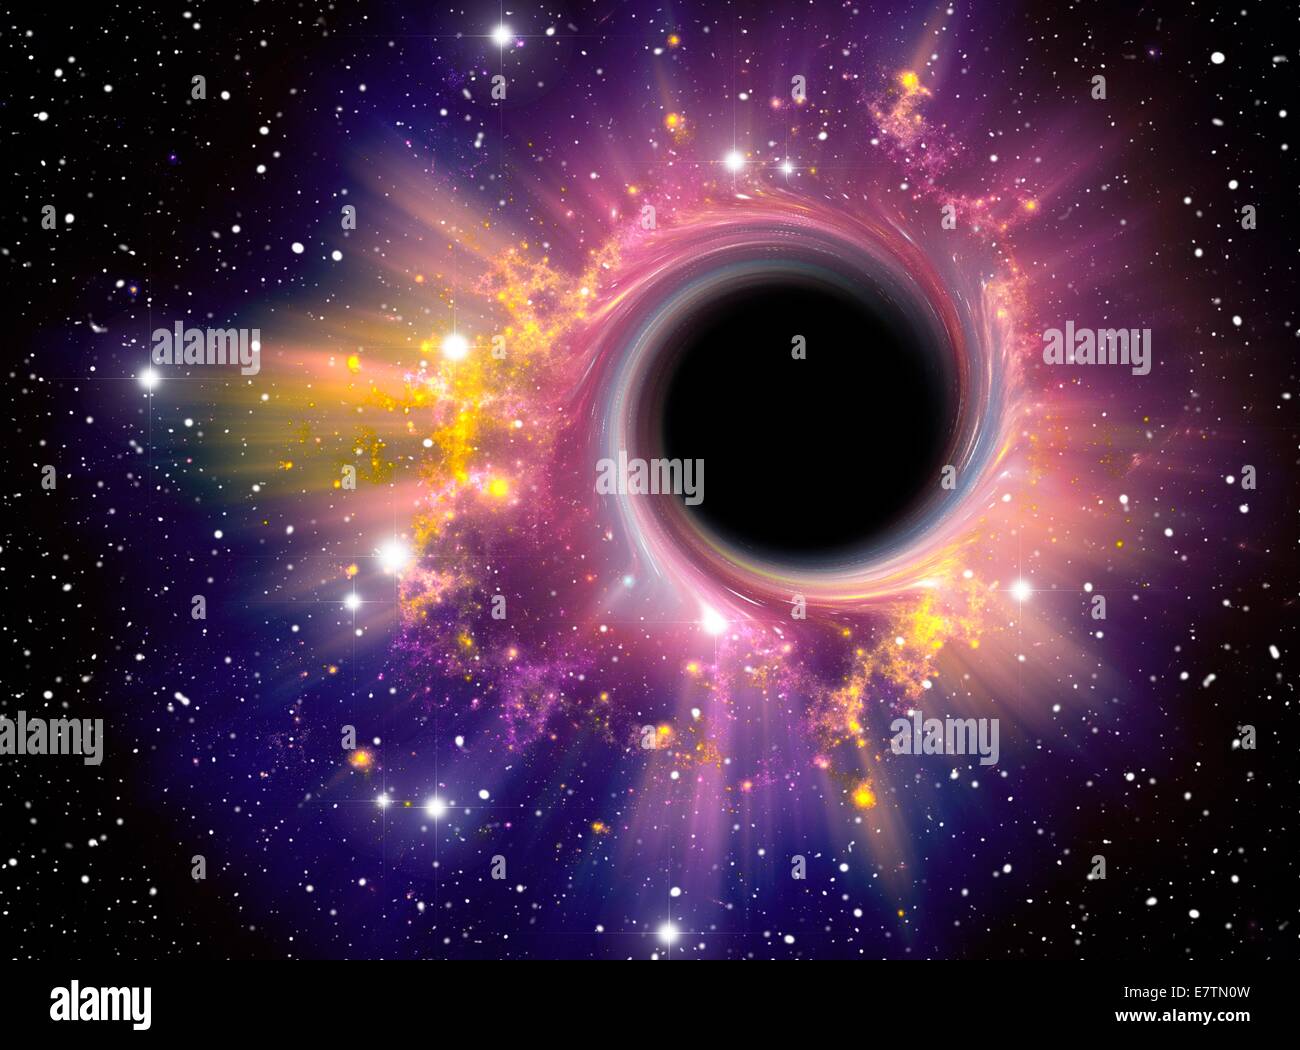 Black hole. Computer artwork representing a black hole against a starfield. A black hole is a super- dense object, thought to form from the collapse of a huge star. Due to their incredible mass, the gravitational field around them is so strong that not ev Stock Photo